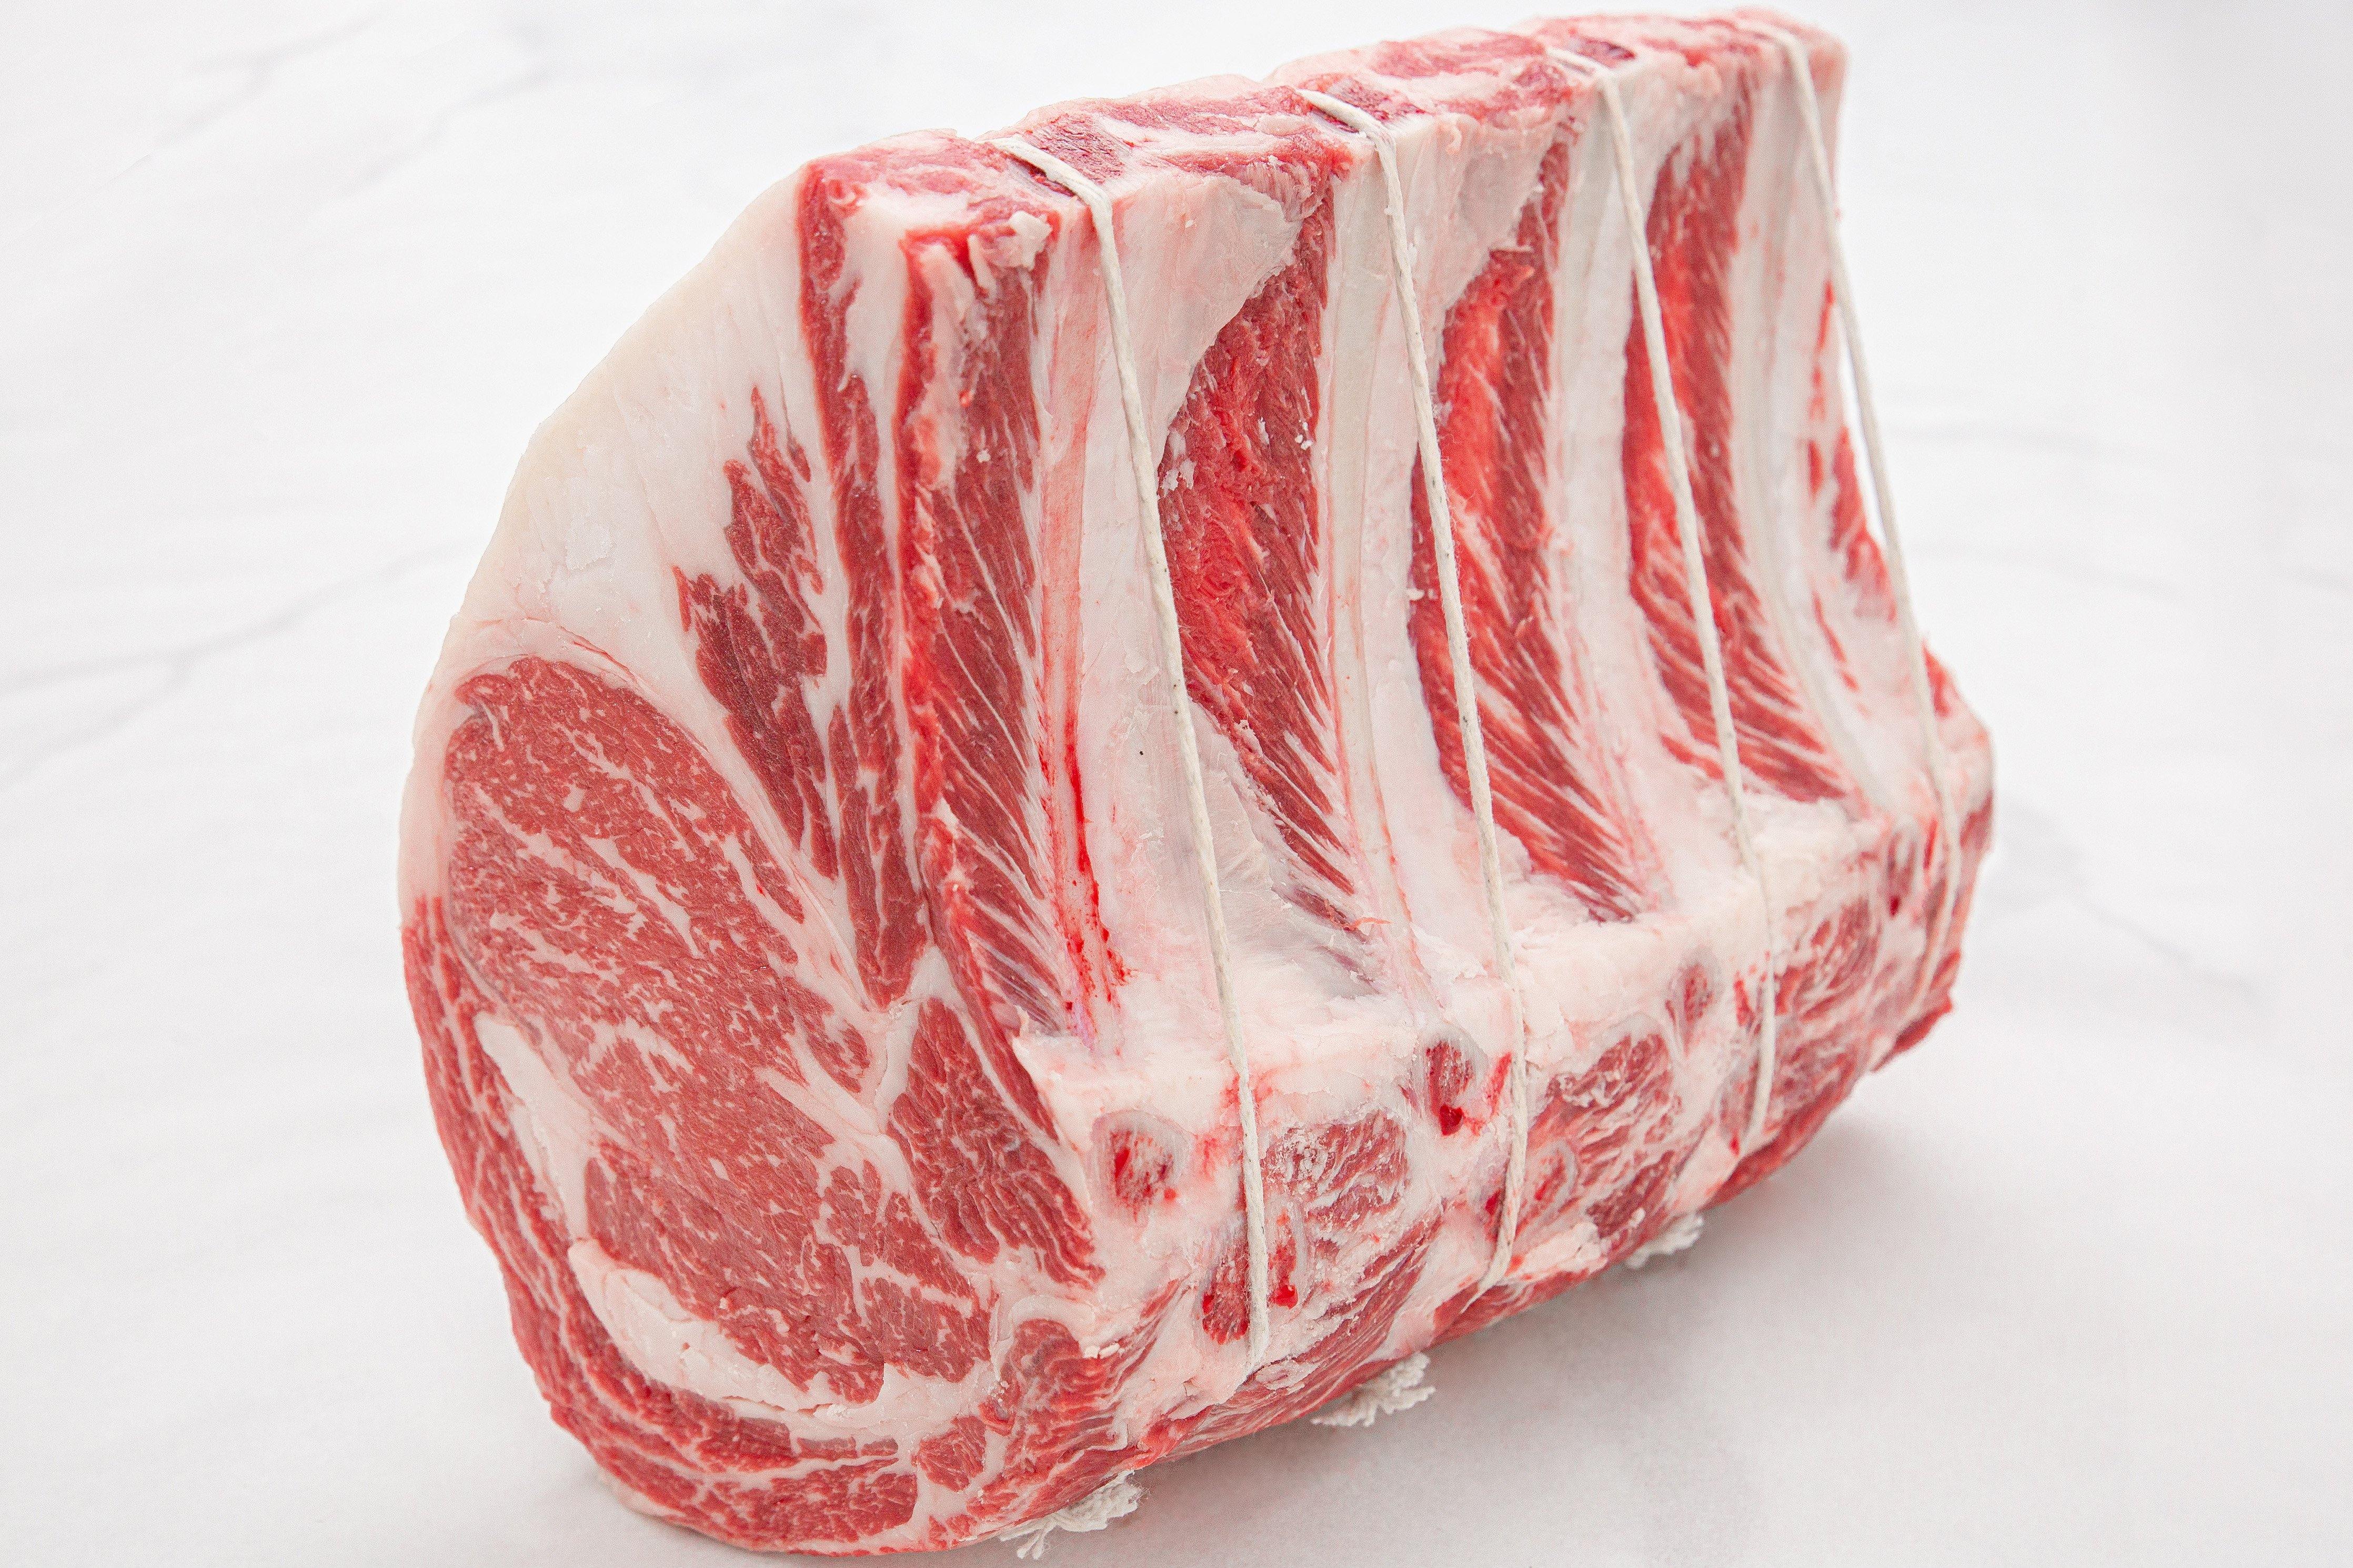 Ungraded Beef (also known as Veal) Rib Steaks – L&M Meat Distributing Inc.